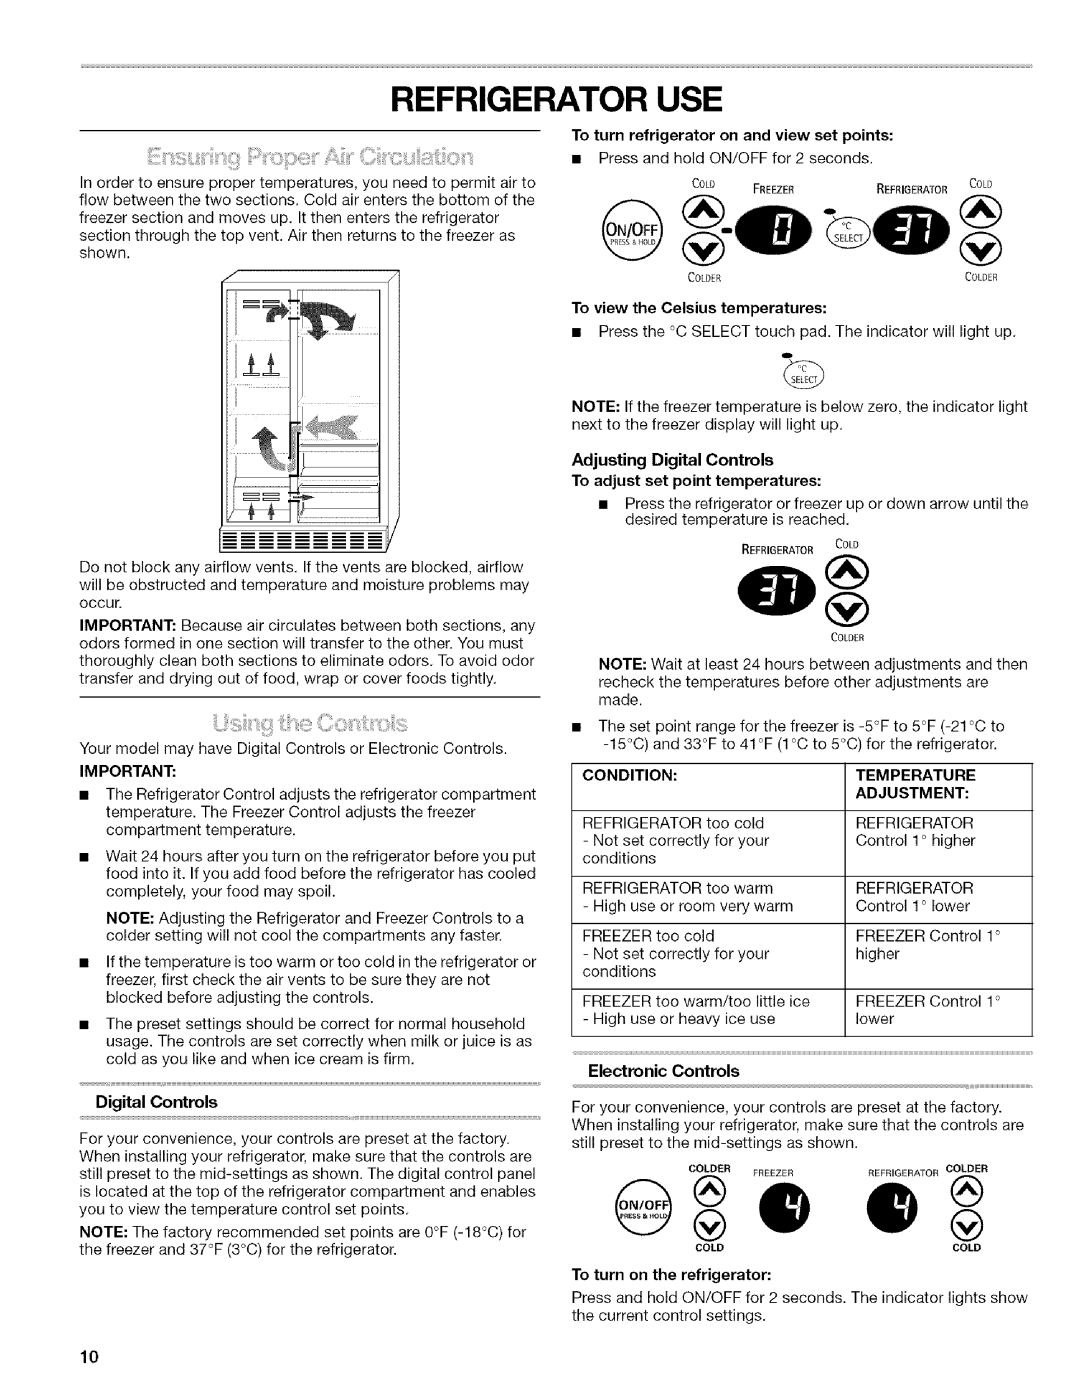 Kenmore 10656829601 manual Refrigerator Use, To turn refrigerator on and view set points, Digital Controls, Temperature 